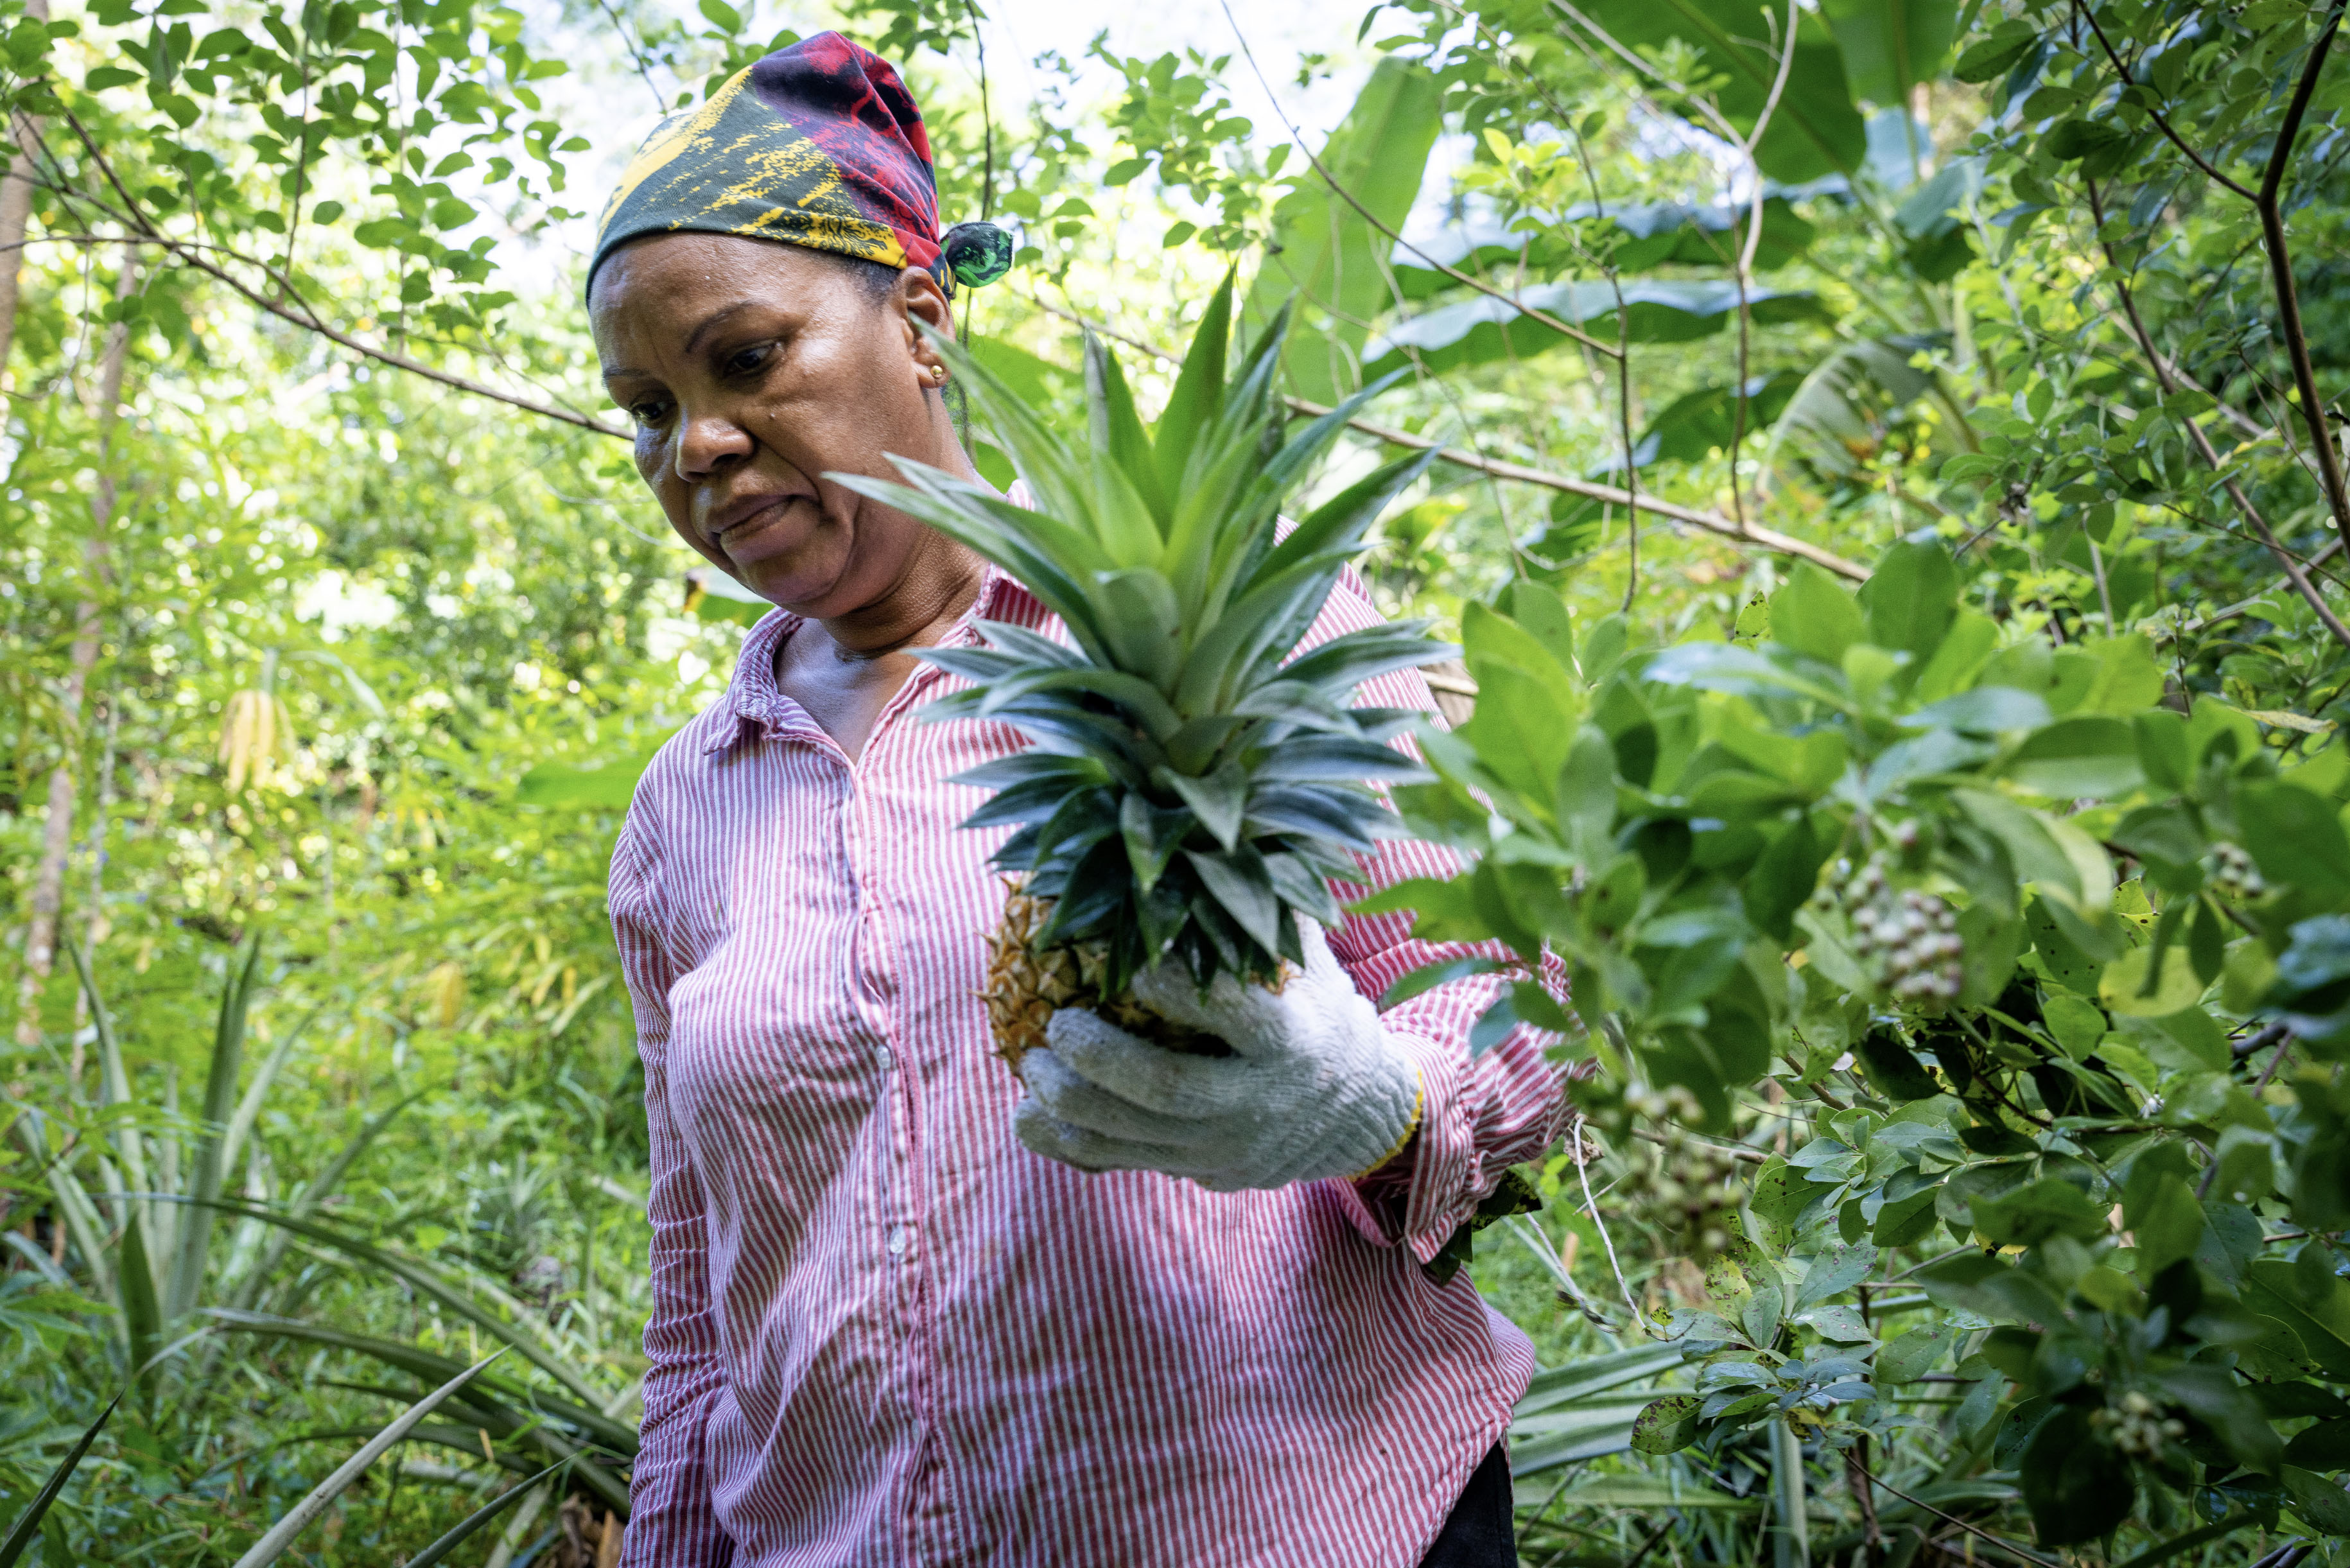 The Food and Agriculture Organization (FAO) highlights that if women could reinvest up to 90% of their earnings back into their households, they could break the cycle of intergenerational poverty. 